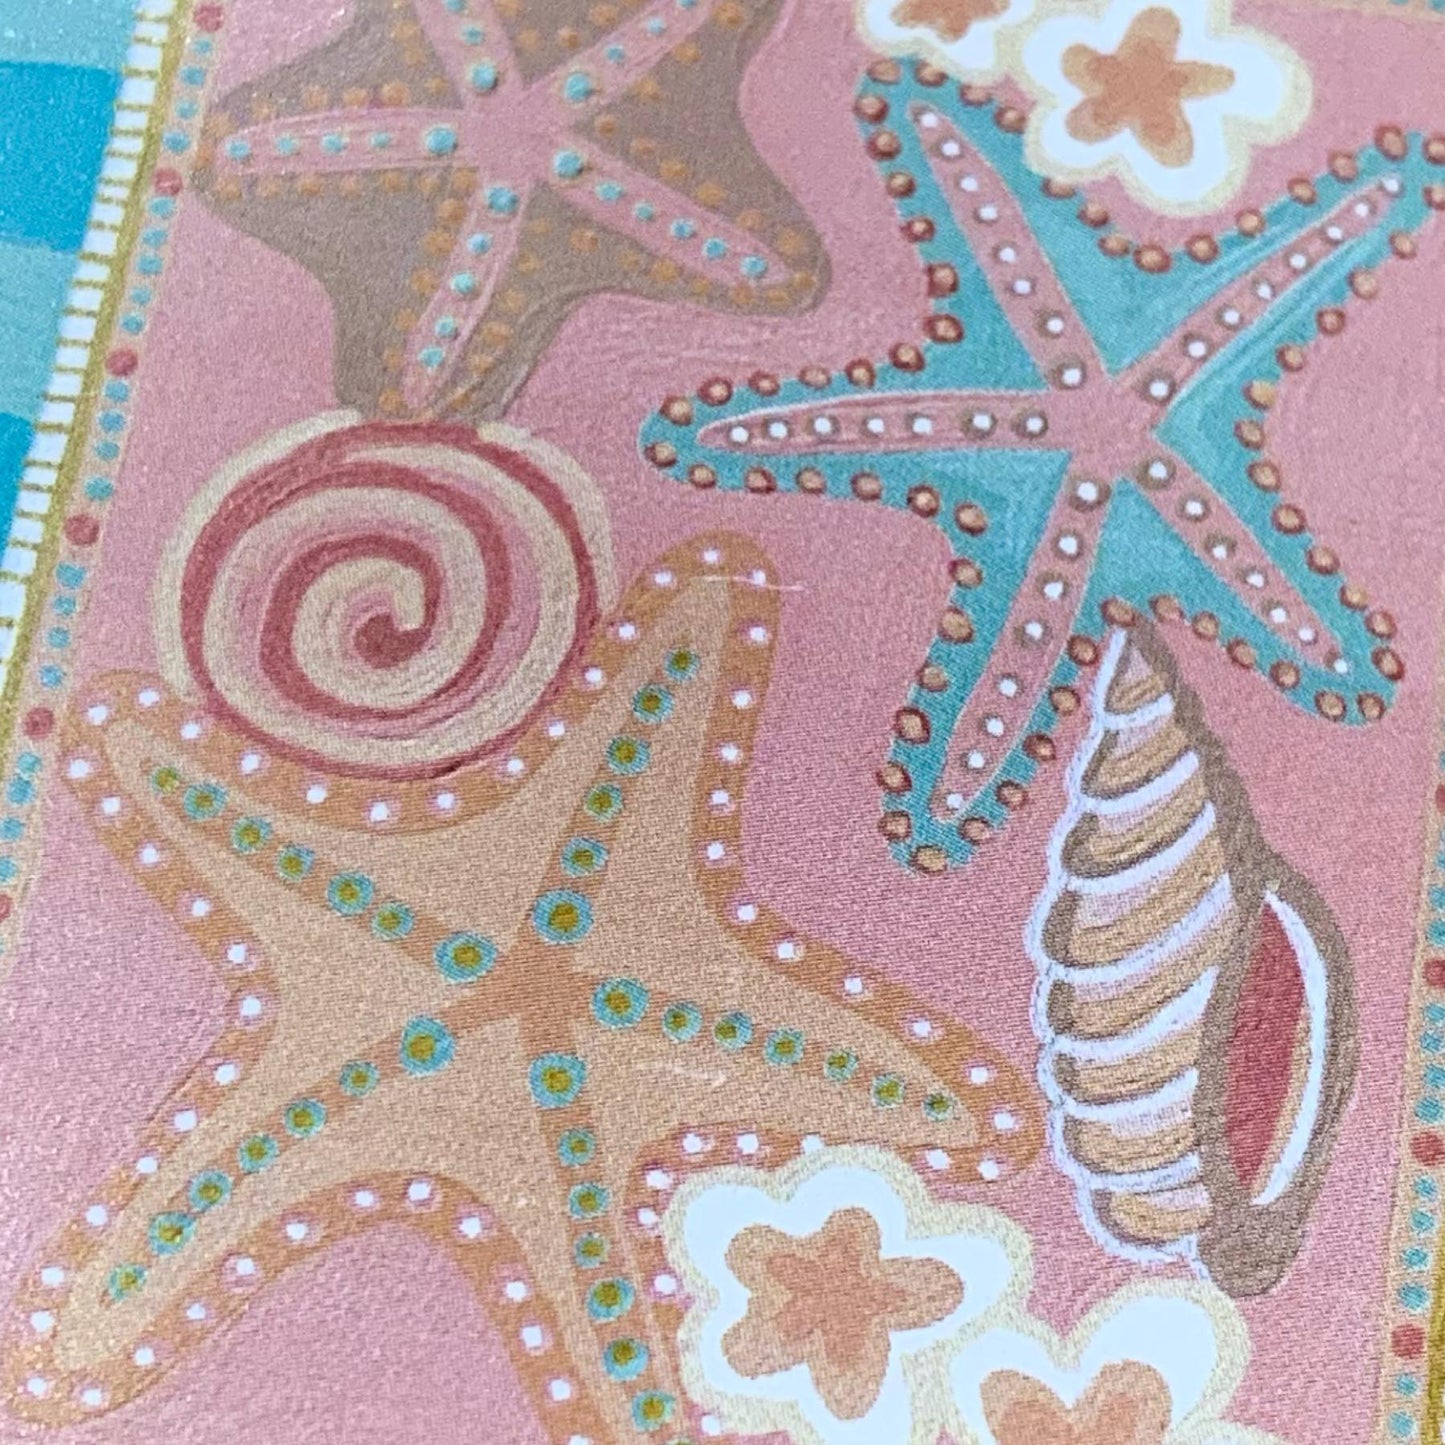 Designs by Claudia - Starfish Gift Tag